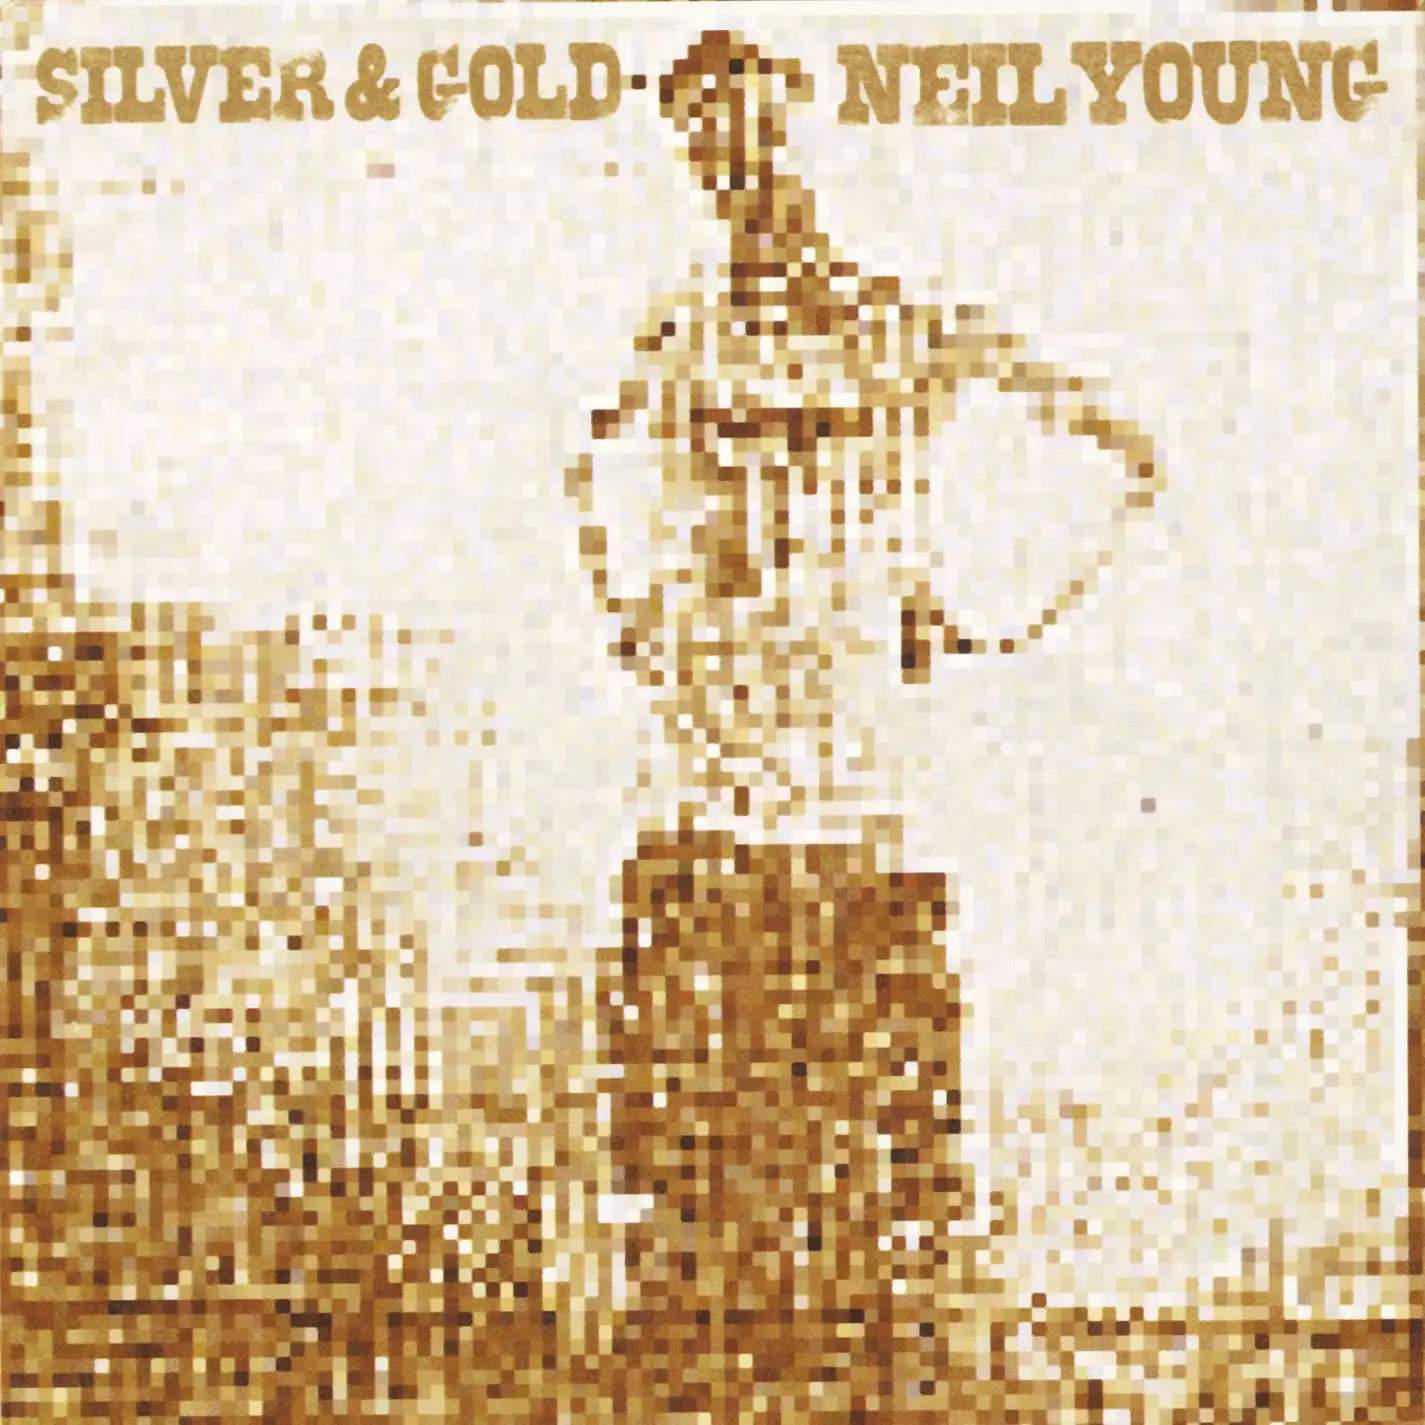 Neil Young - Silver and Gold artwork